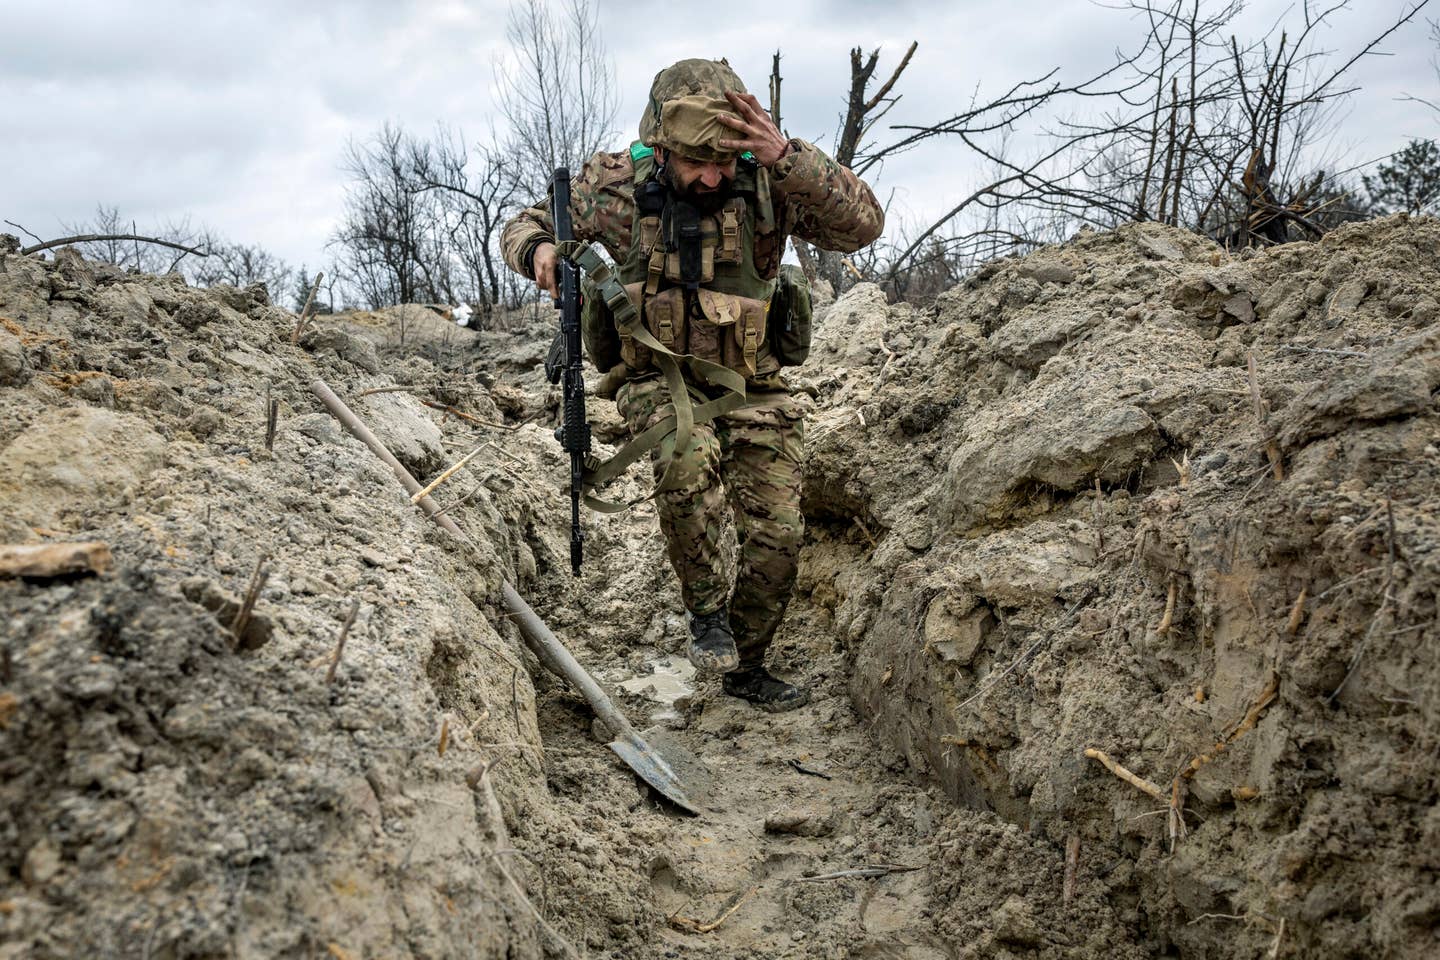 A Ukrainian Army medic runs through a partially dug trench along the front line outside of Bakhmut, Ukraine, on March 5, 2023. Russian forces have been attacking Ukrainian troops as part of an offensive to encircle Bakhmut in the eastern Donbas region. <em>Photo by John Moore/Getty Images</em>